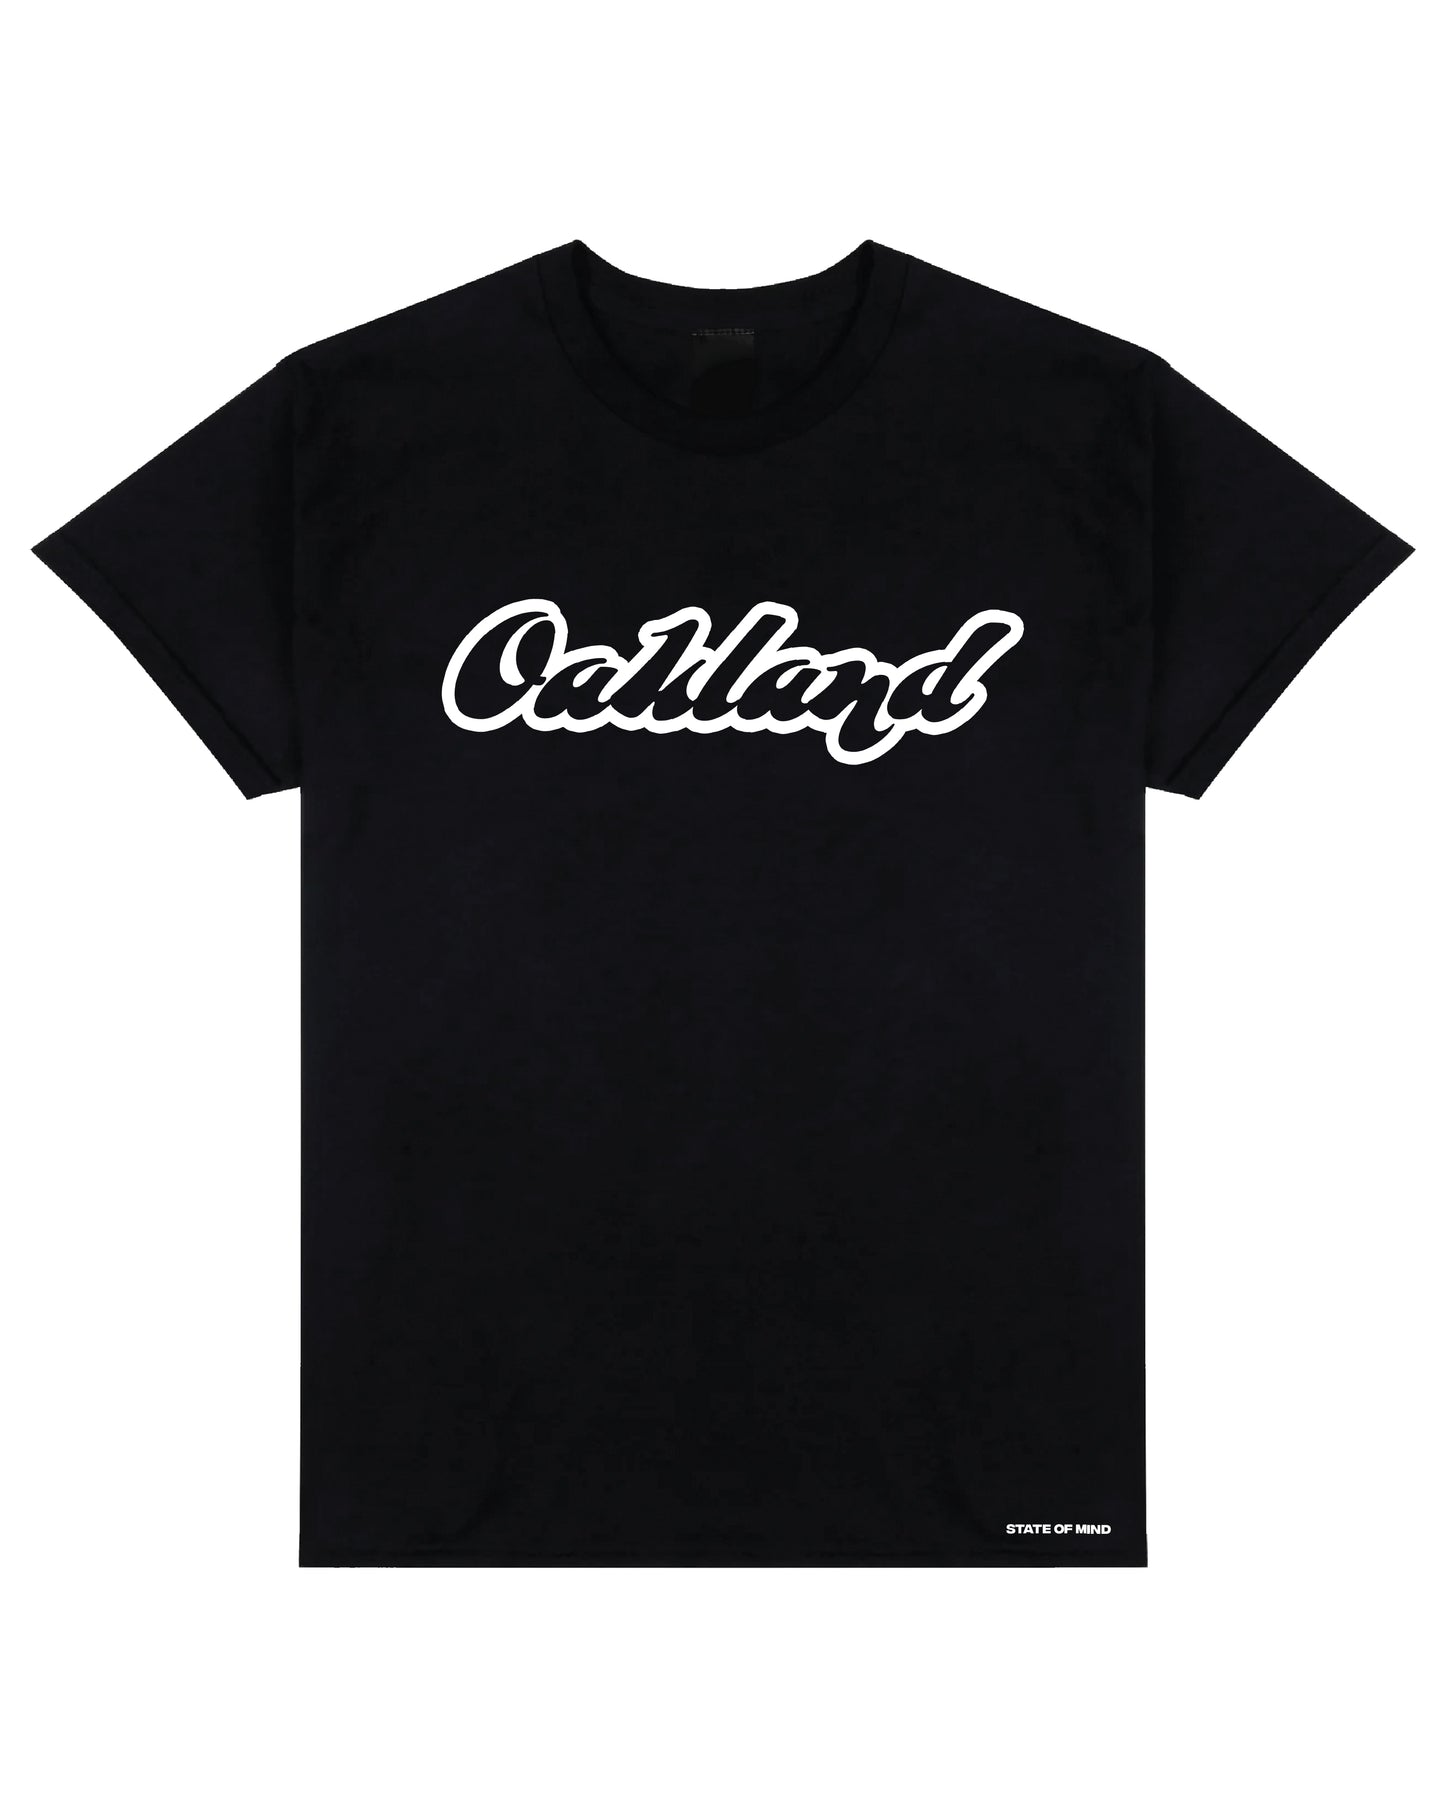 OAKLAND TEE [LIMITED EDITION]